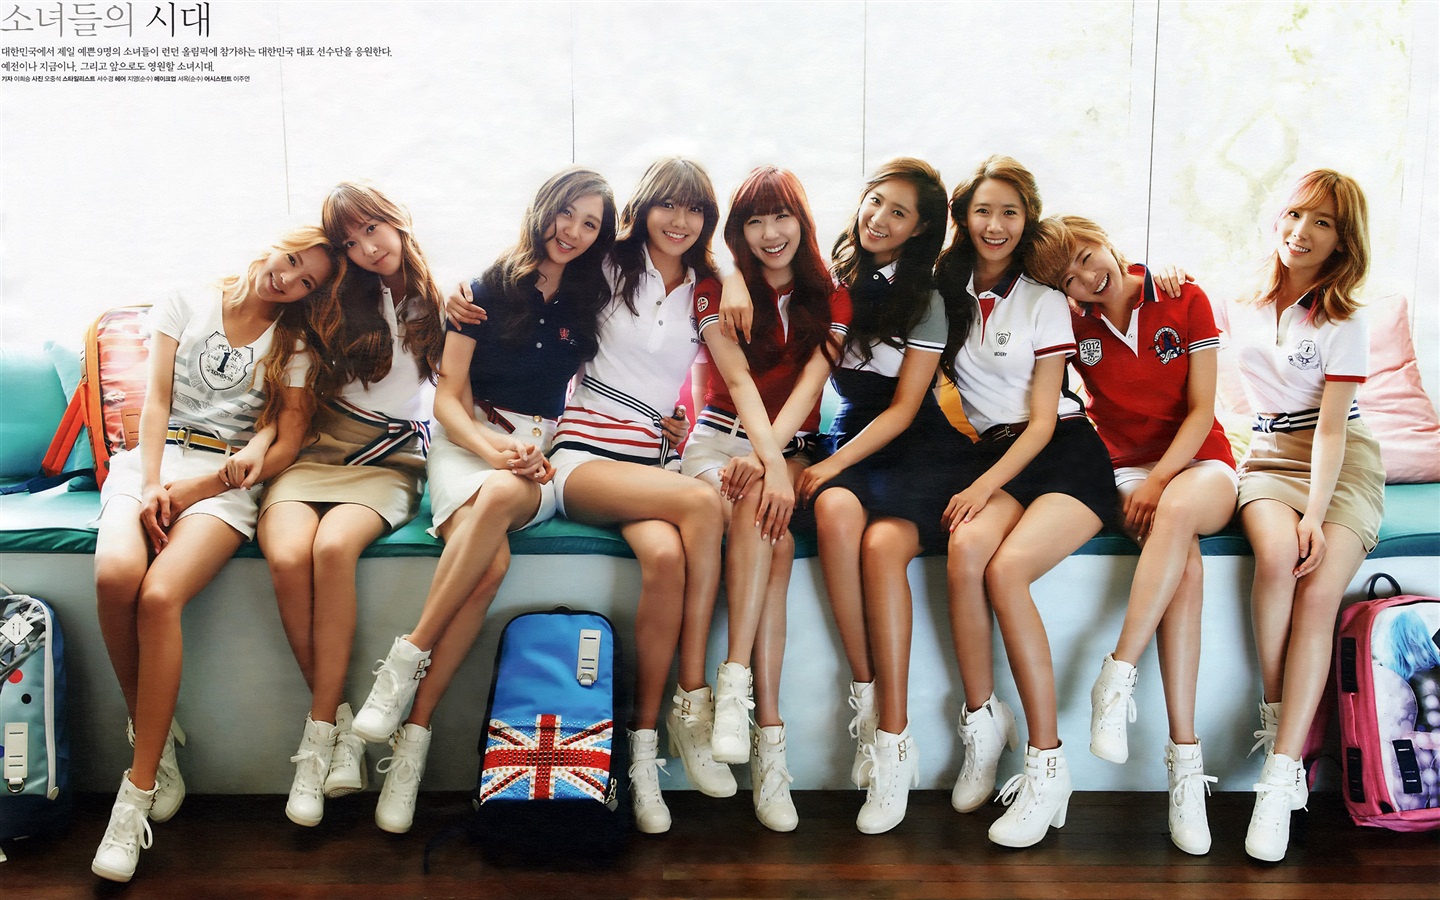 Girls Generation latest HD wallpapers collection #1 - 1440x900